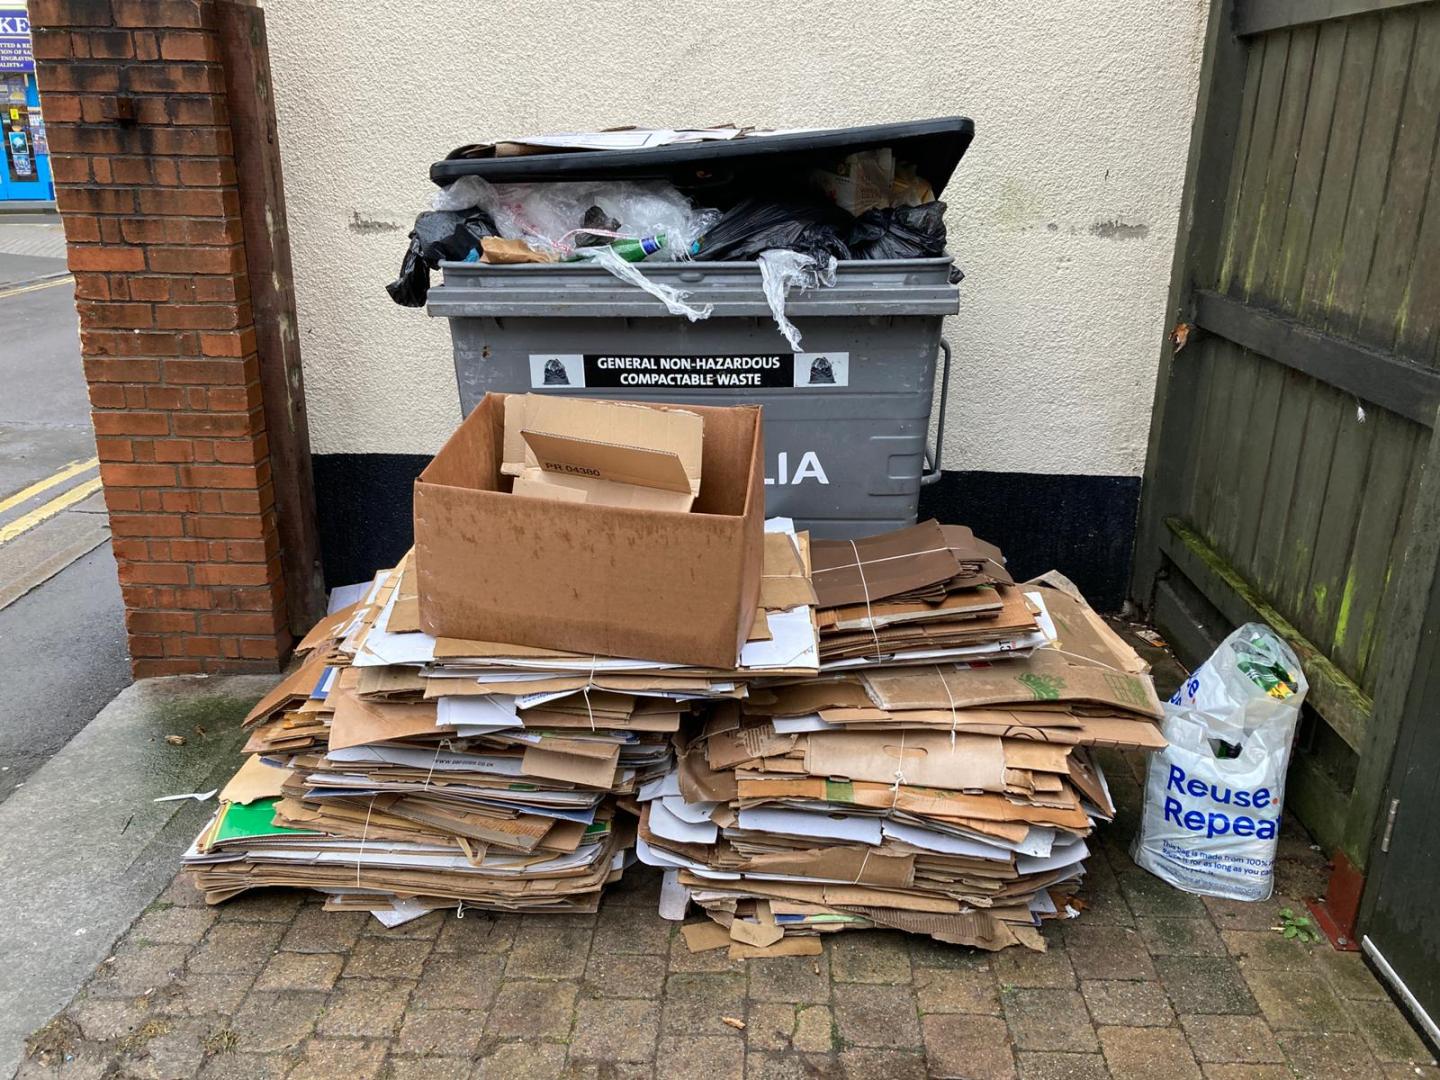 A photo of a large business waste container overflowing with rubbish and a large pile of cardboard in front